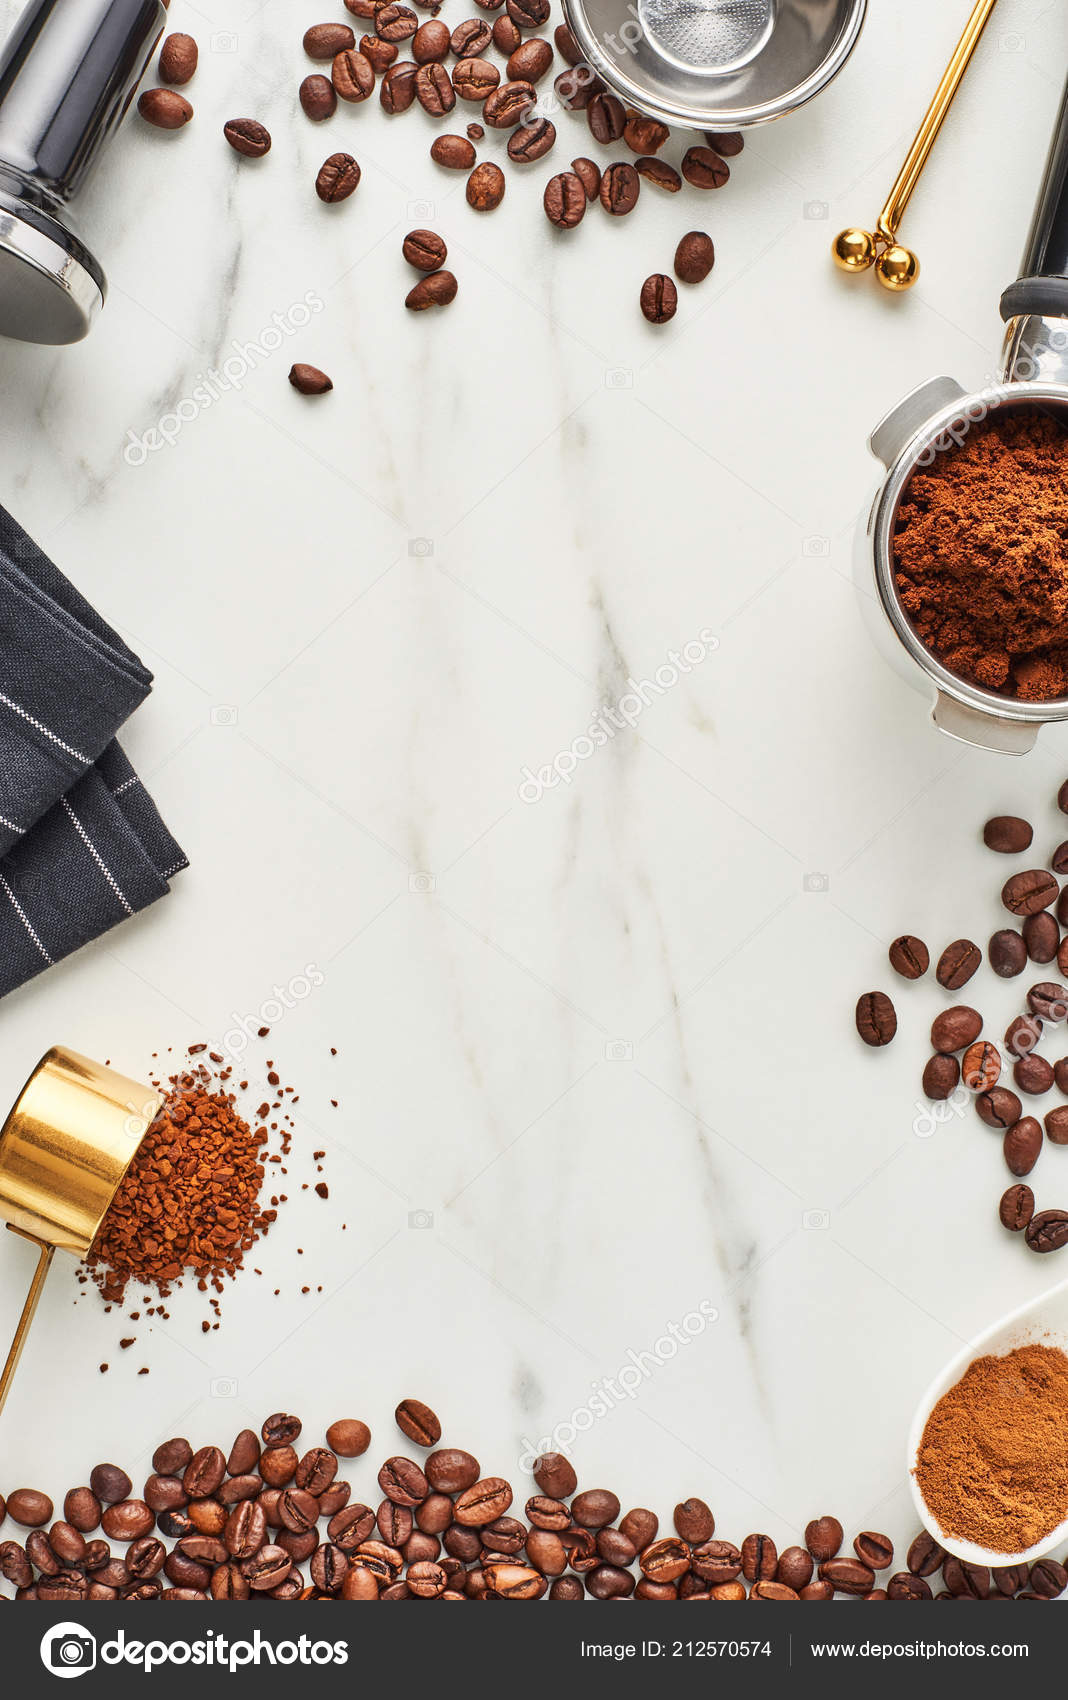 Mockup flat lay with craft accessories and coffee beans on white background  Stock Photo by AtlasComposer